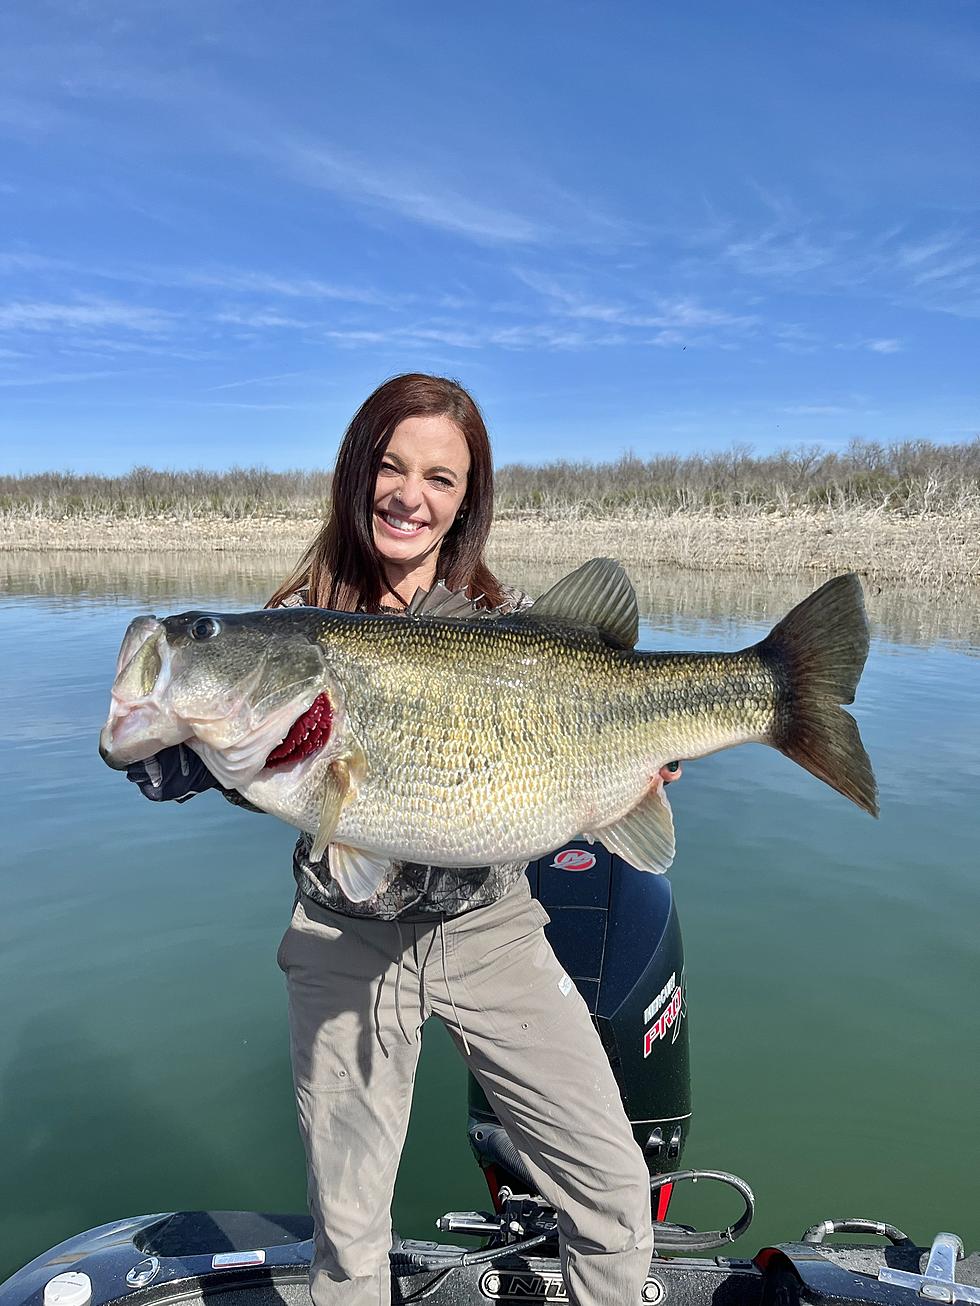 A World-Record Catch at a Texas Lake